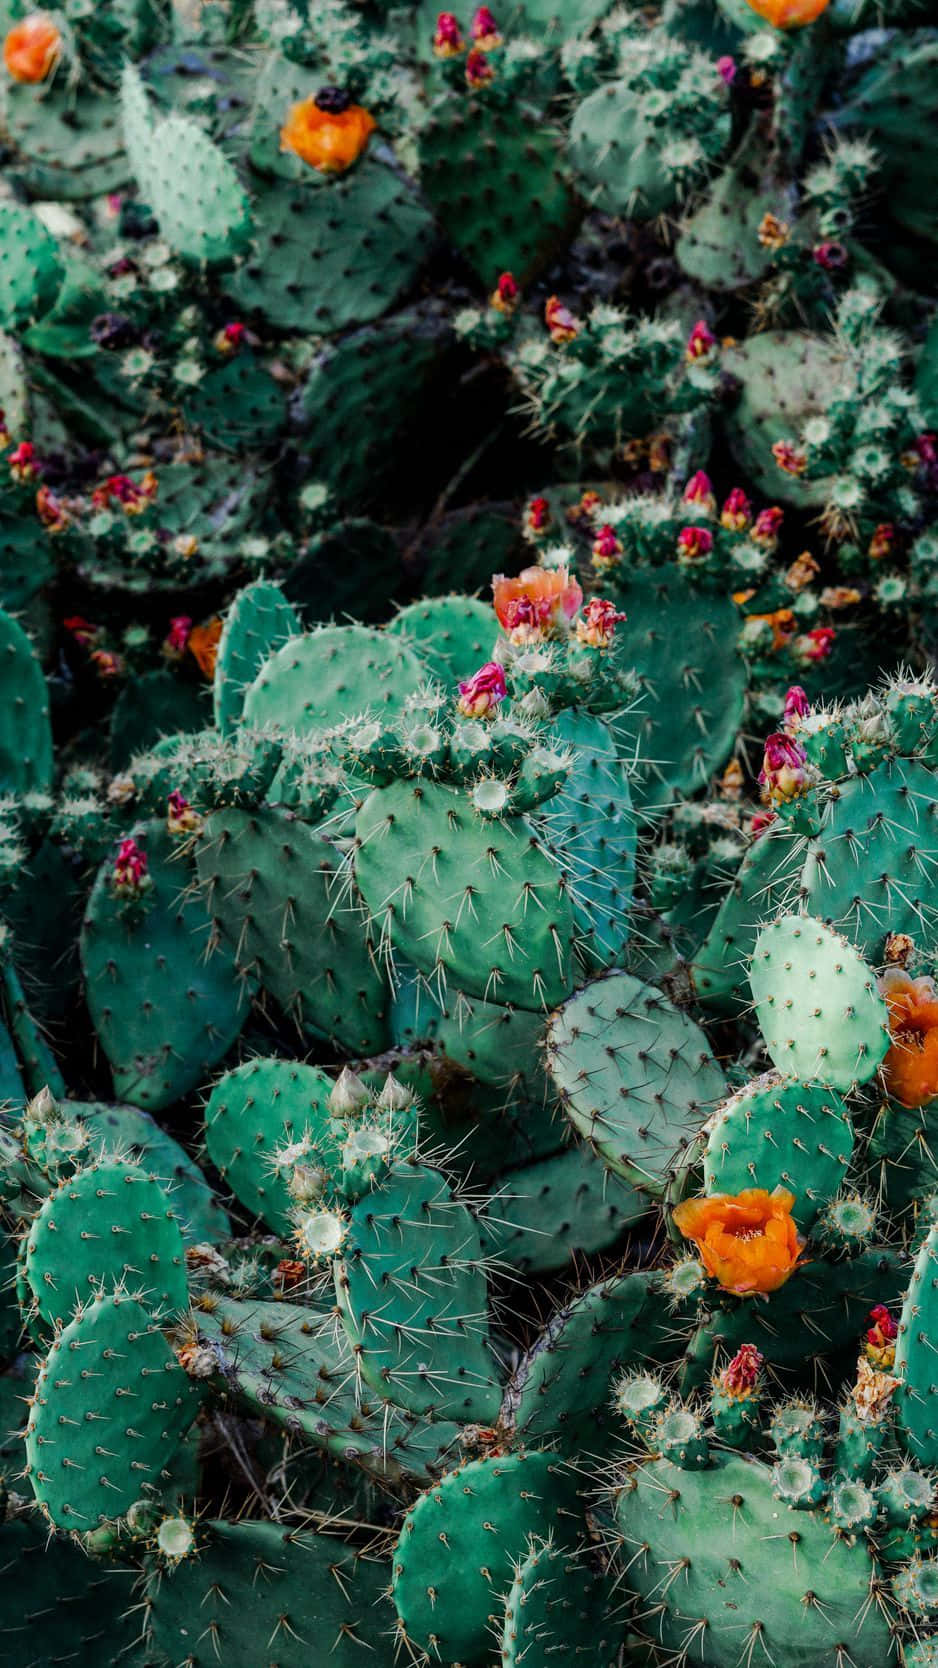 Freshen up your phone with this beautiful cactus iPhone wallpaper. Wallpaper